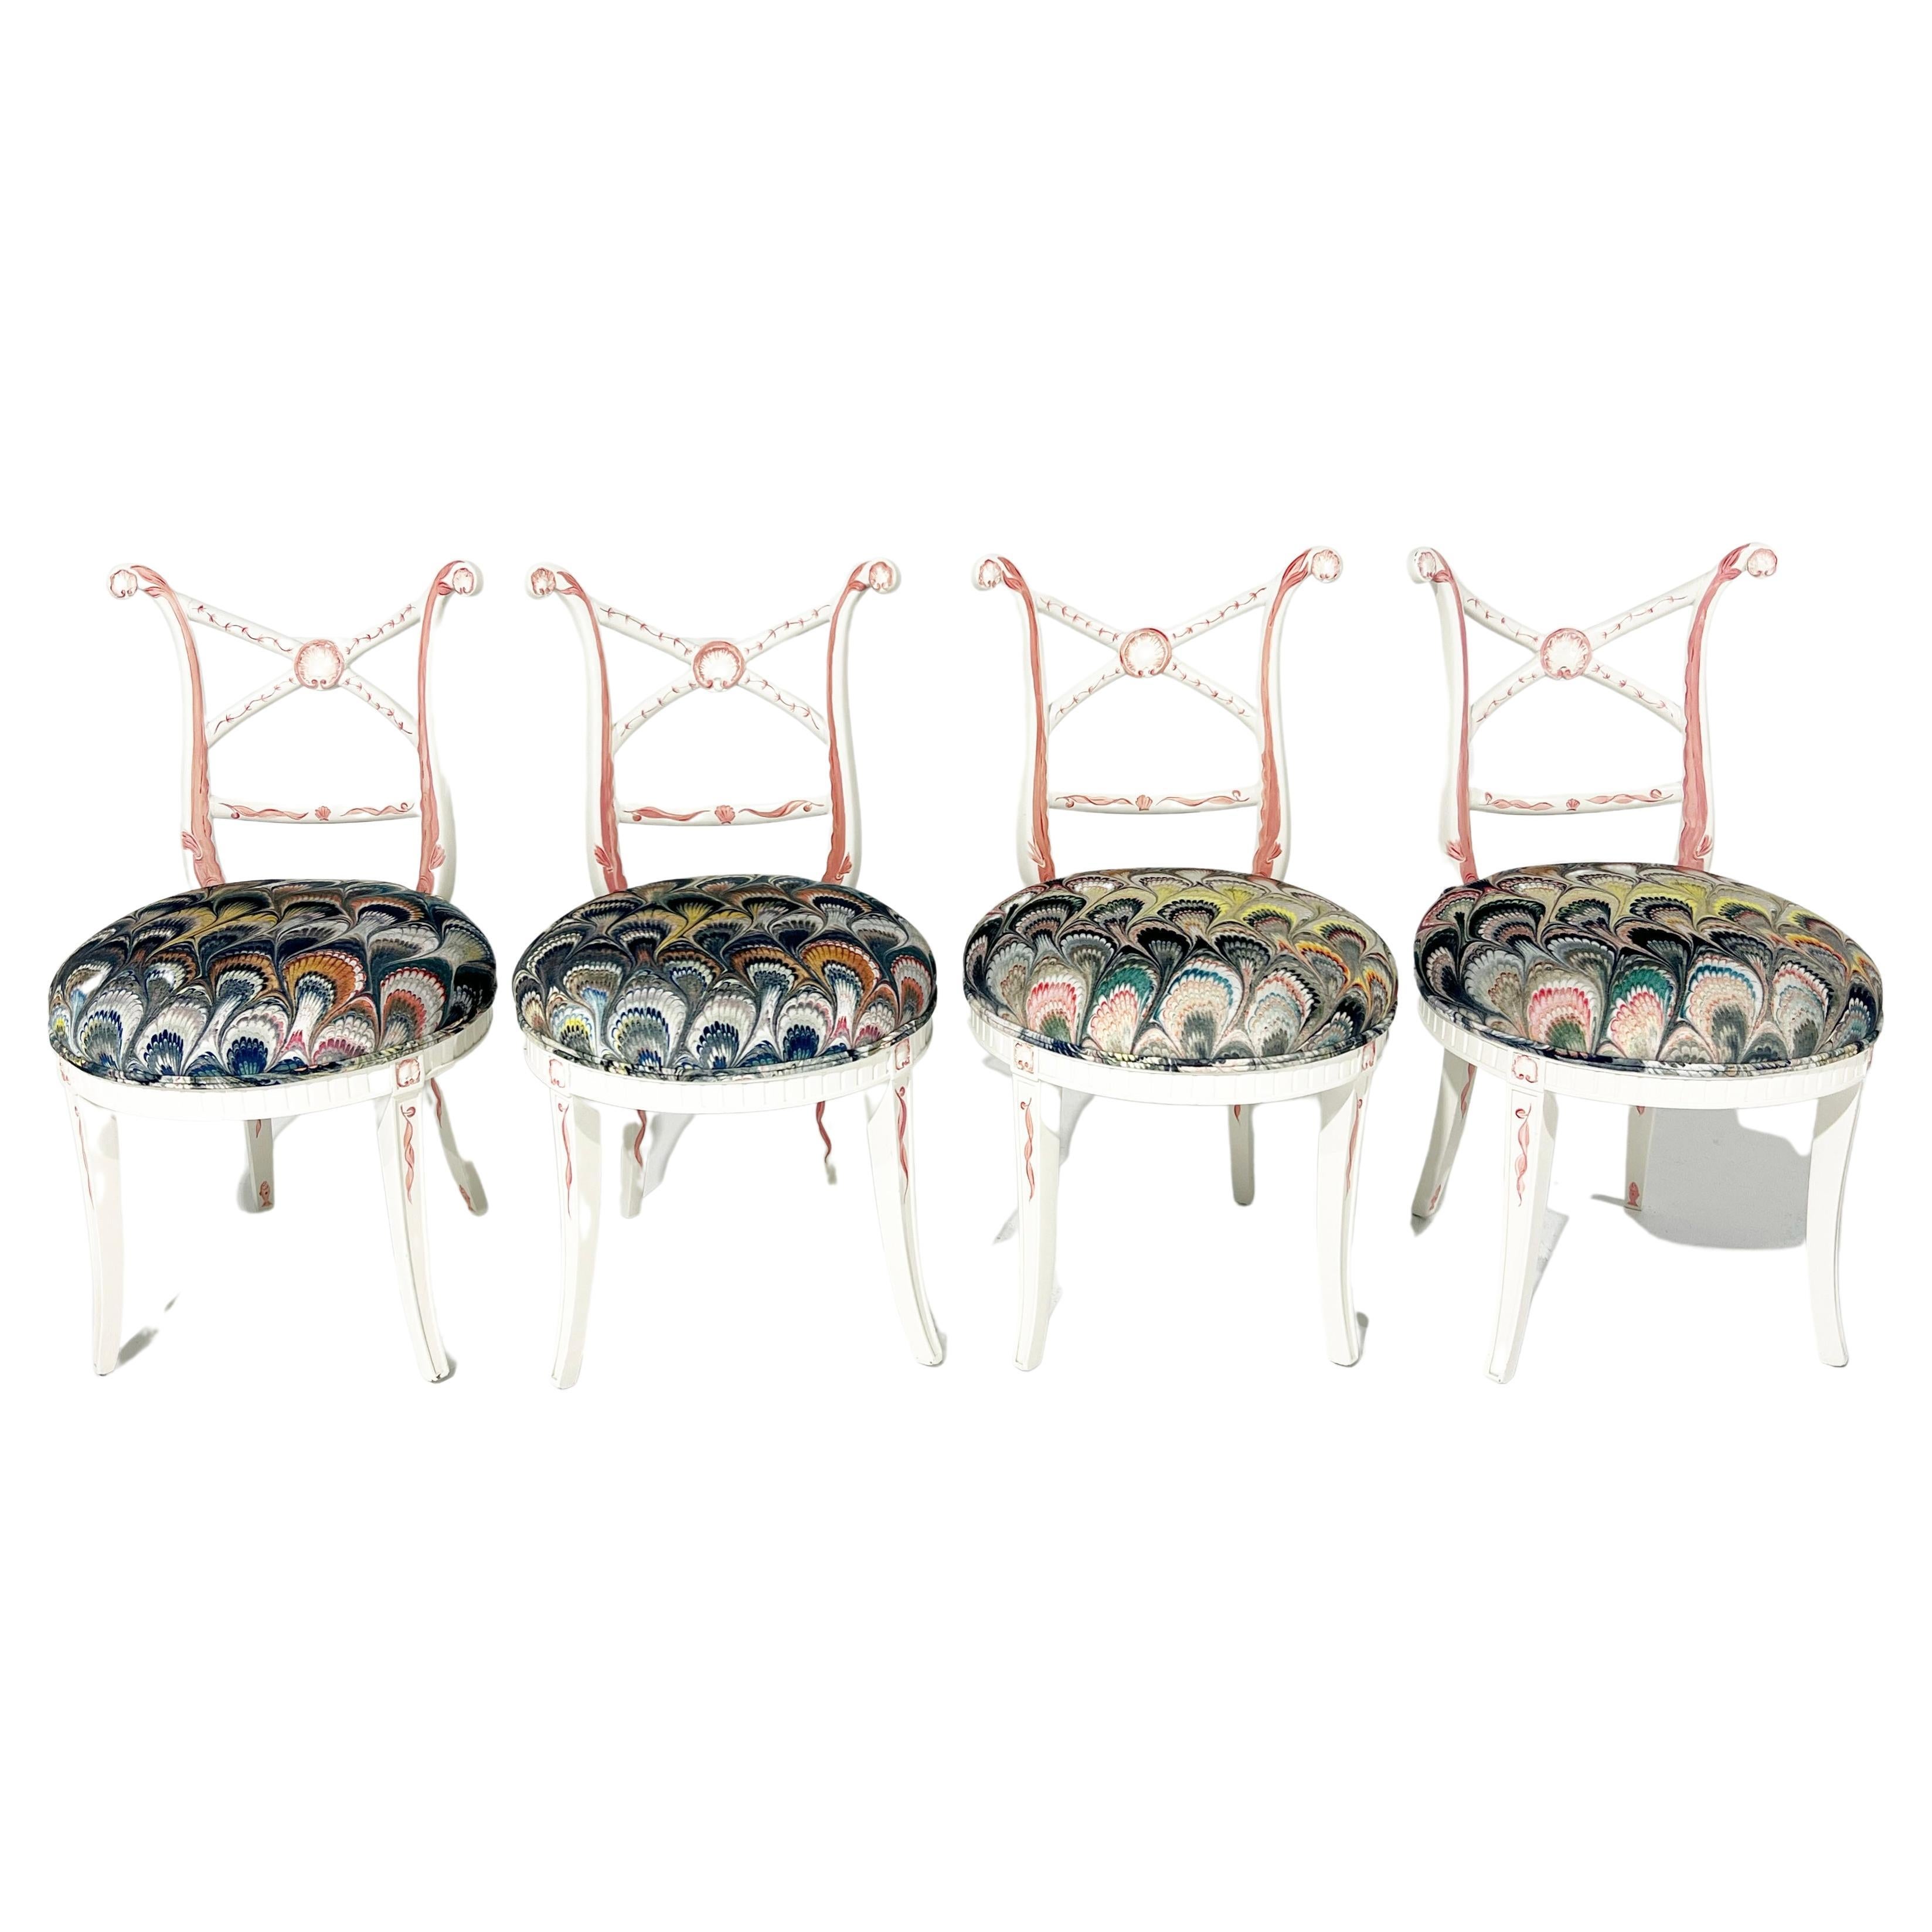 One-of-a-kind, Hand-Painted 'Sea Monsters' Chairs, Set of 4 For Sale